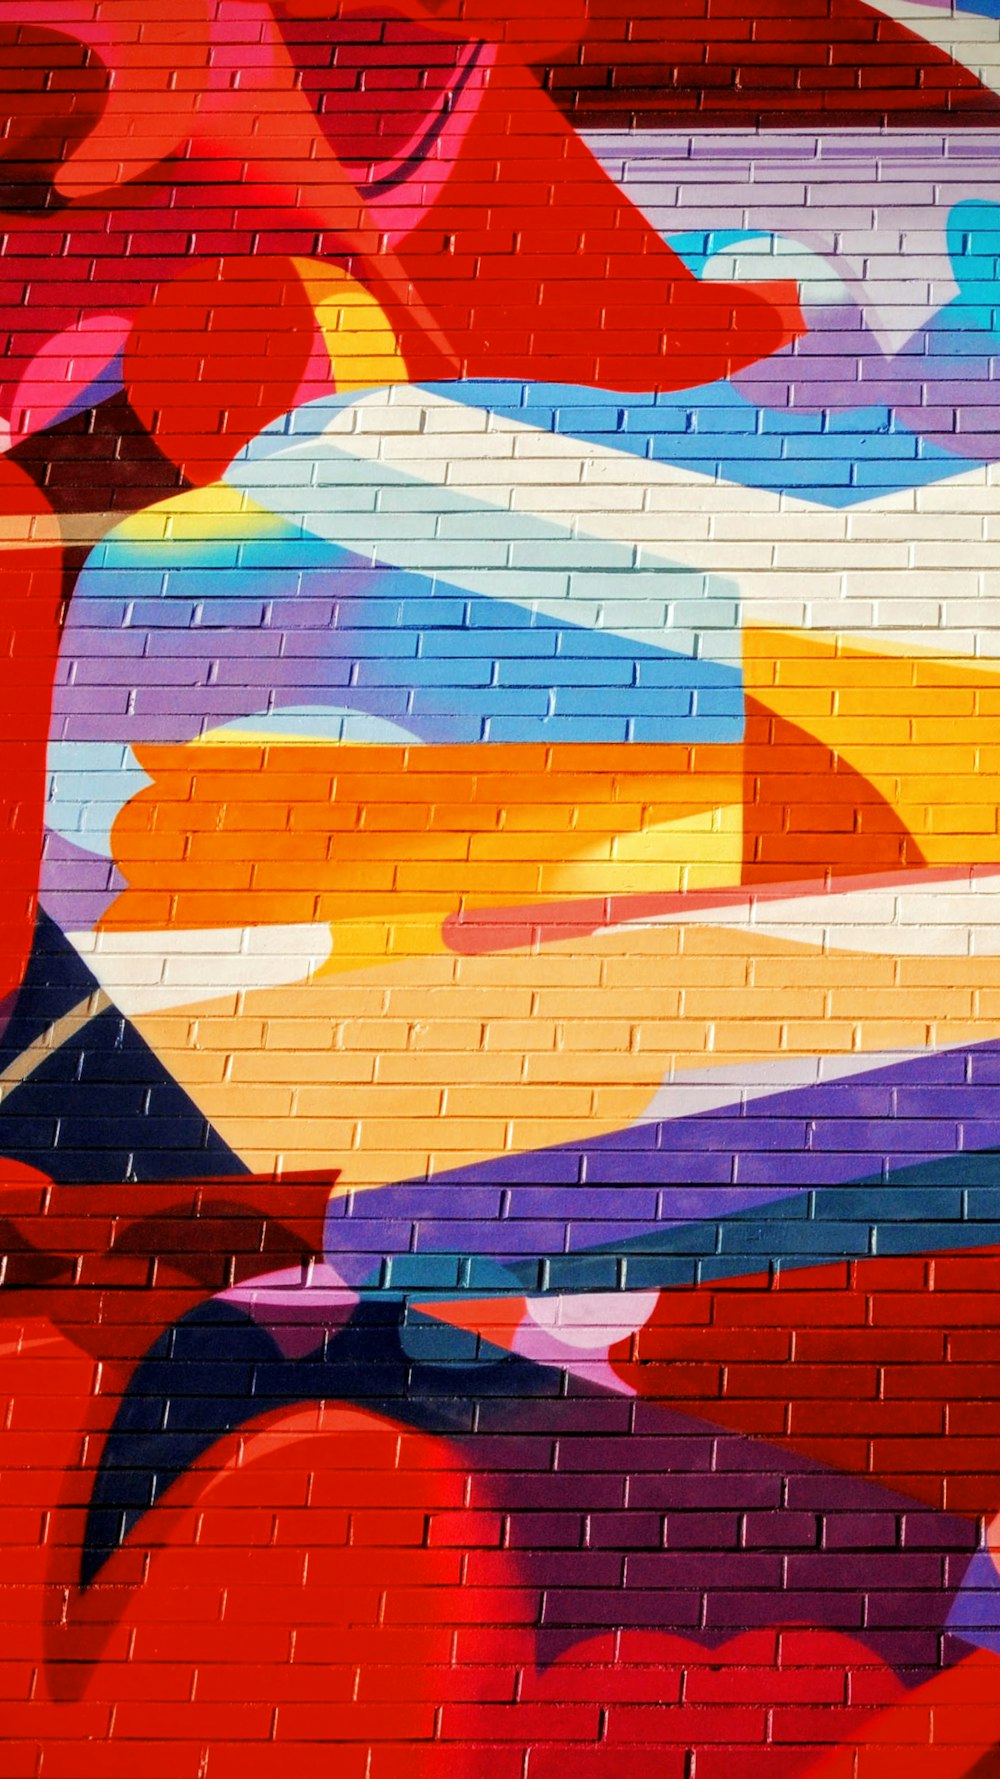 multicolored mural painting - 100 instagram pictures hd download free images on unsplash